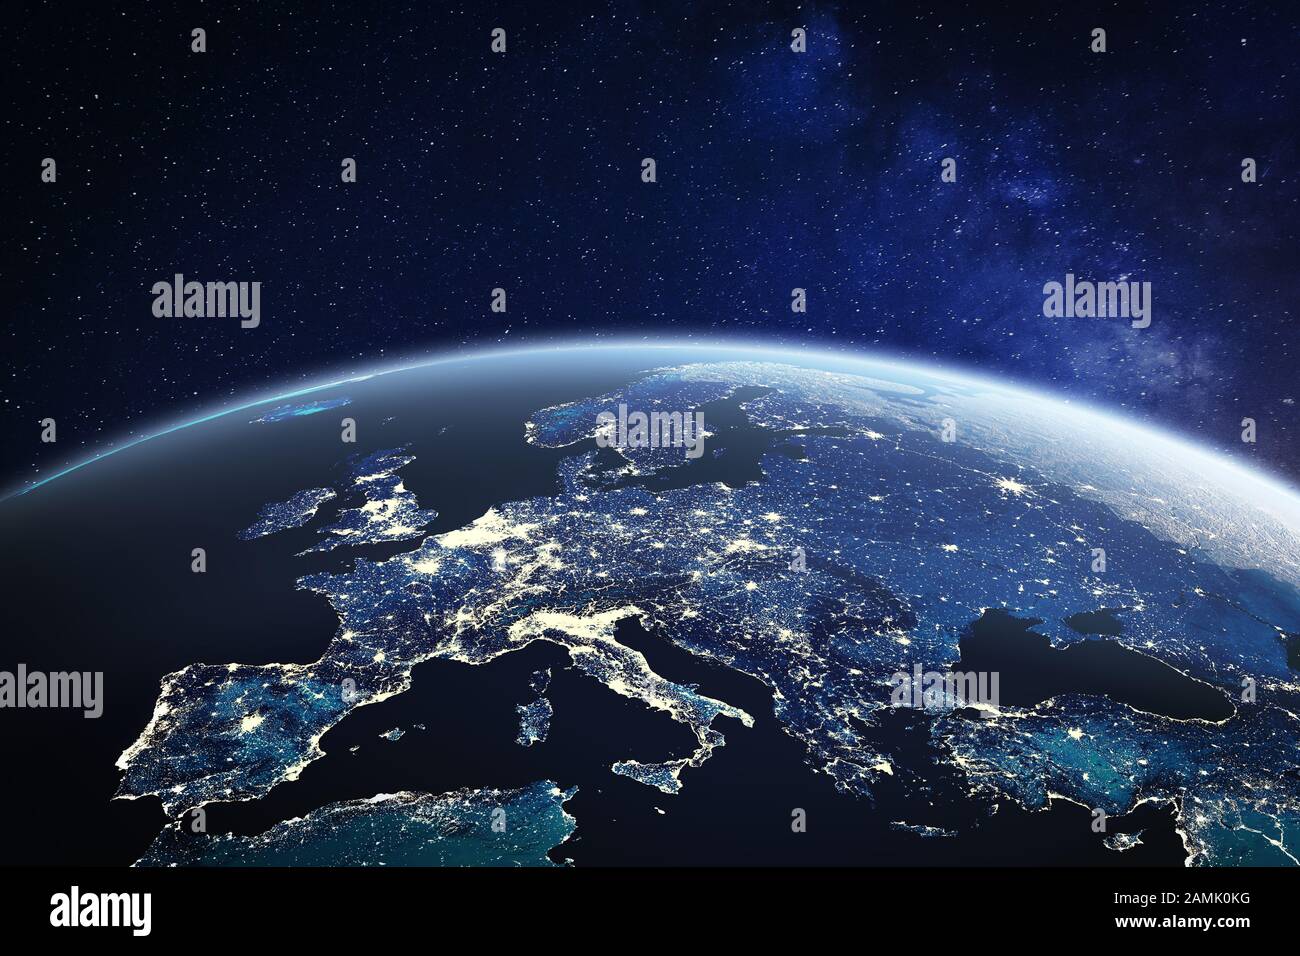 Europe viewed from space at night with city lights in European Union member states, global EU business and finance, satellite communication technology Stock Photo